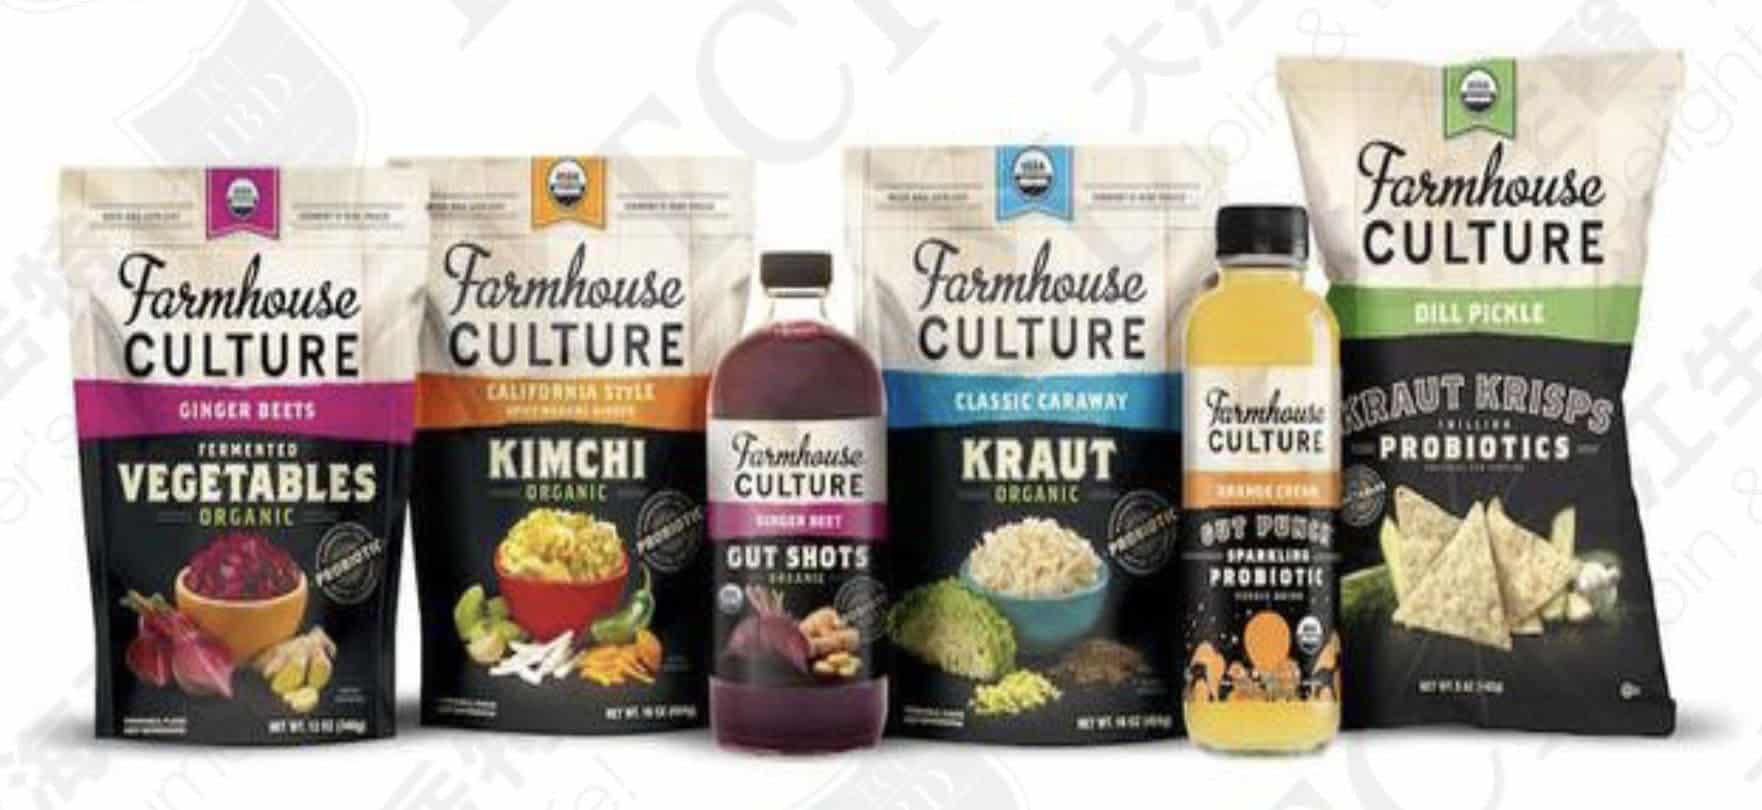 Probiotic food and beverages produced by Farmhouse Culture, Data source: Foodaily